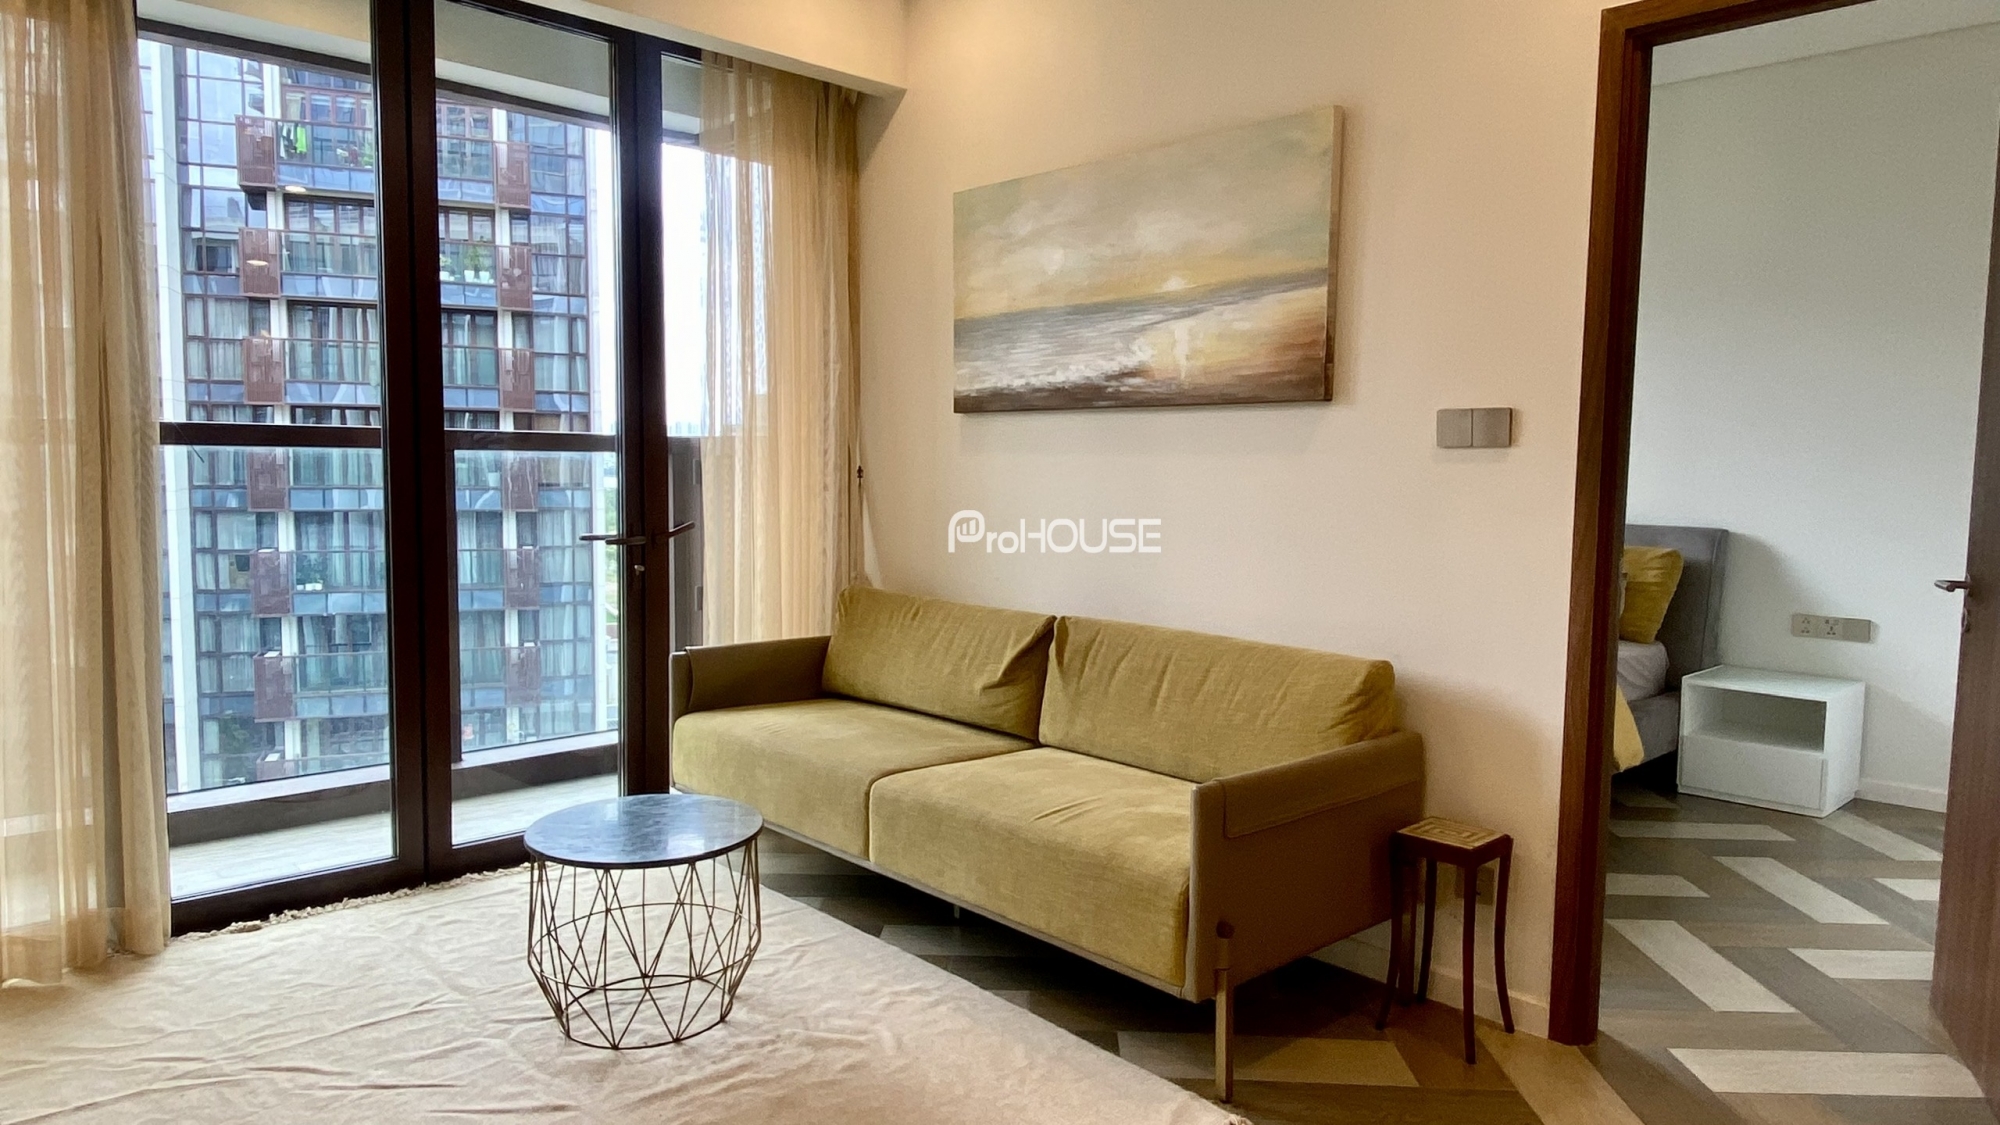 1 bedroom apartment full of luxury furniture and beautiful view for sale at The Galleria Metropole